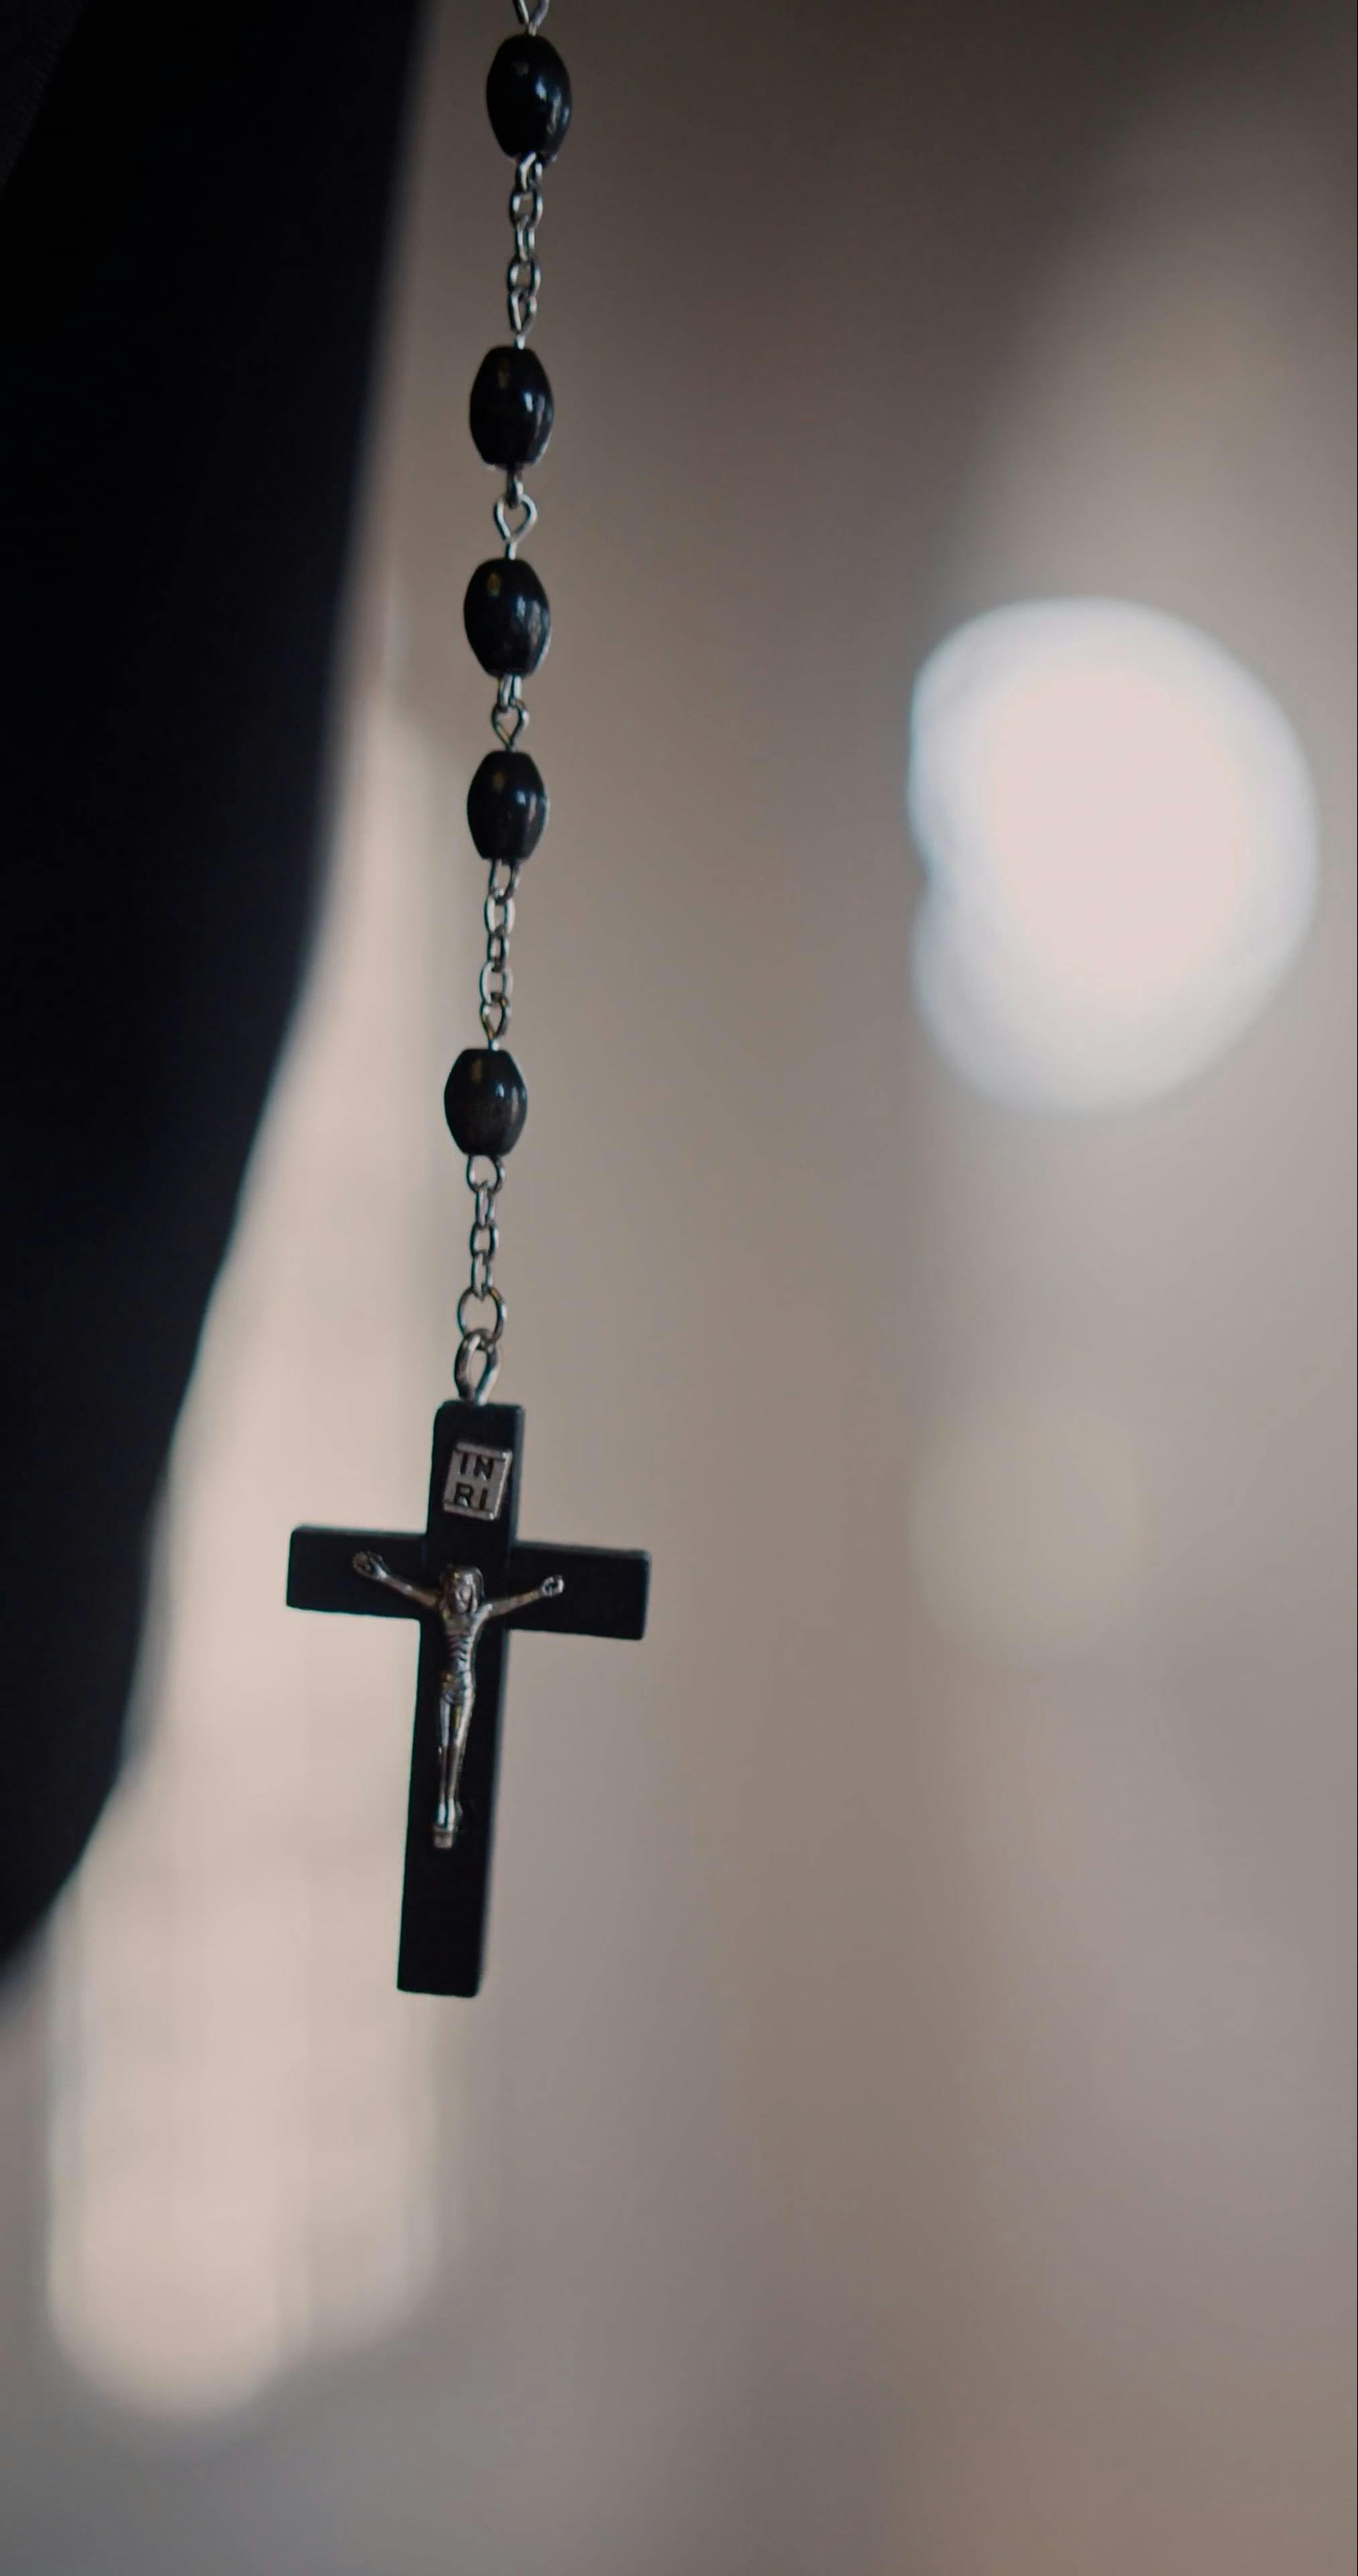 Free Wallpapers from Rugged Rosaries Rugged Rosaries